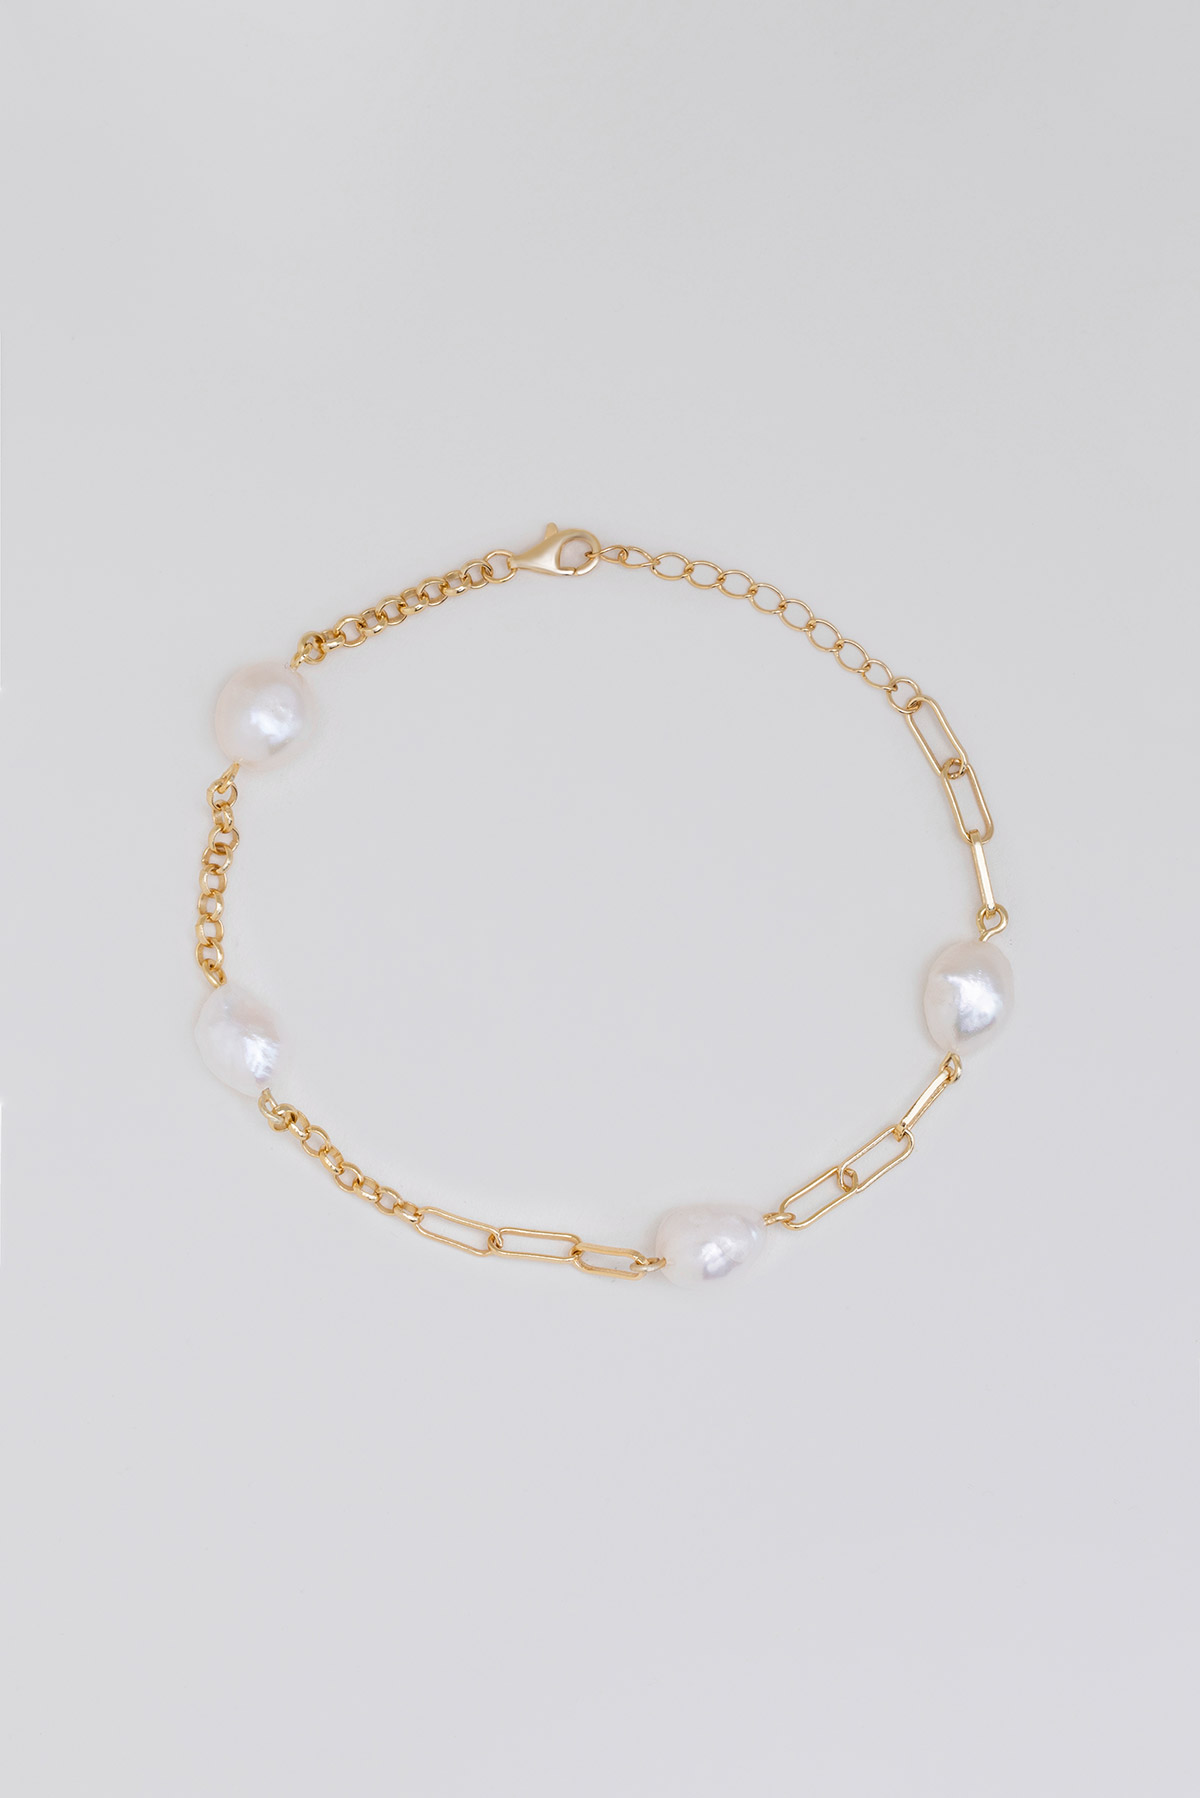 18 Karat Yellow Gold Plated Silver Chain Bracelet with Natural Pearl Stones